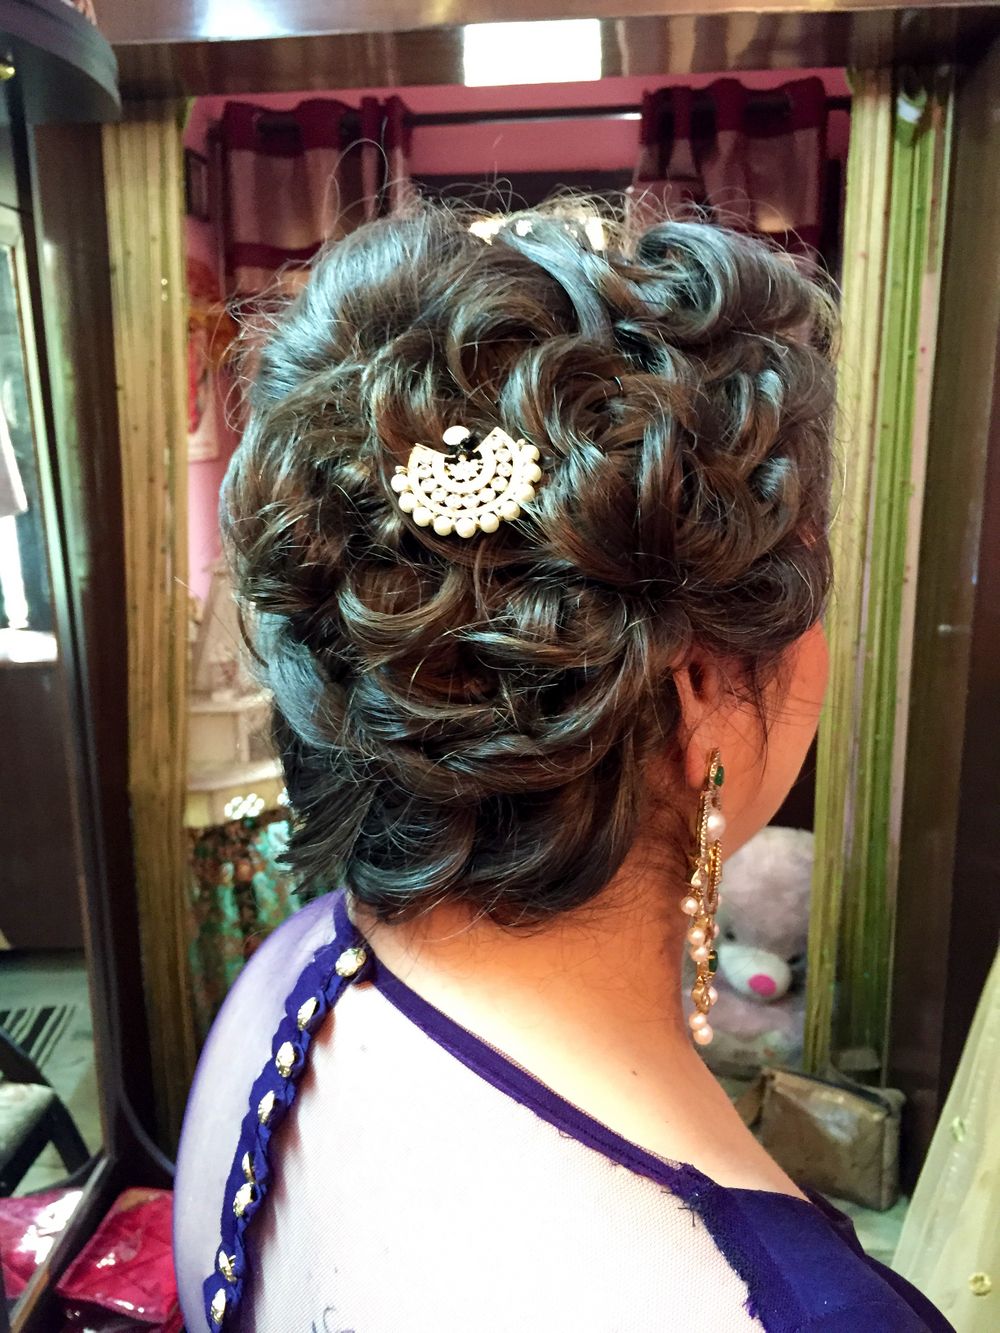 Photo of Bun with tied up curls for sangeet or engagement